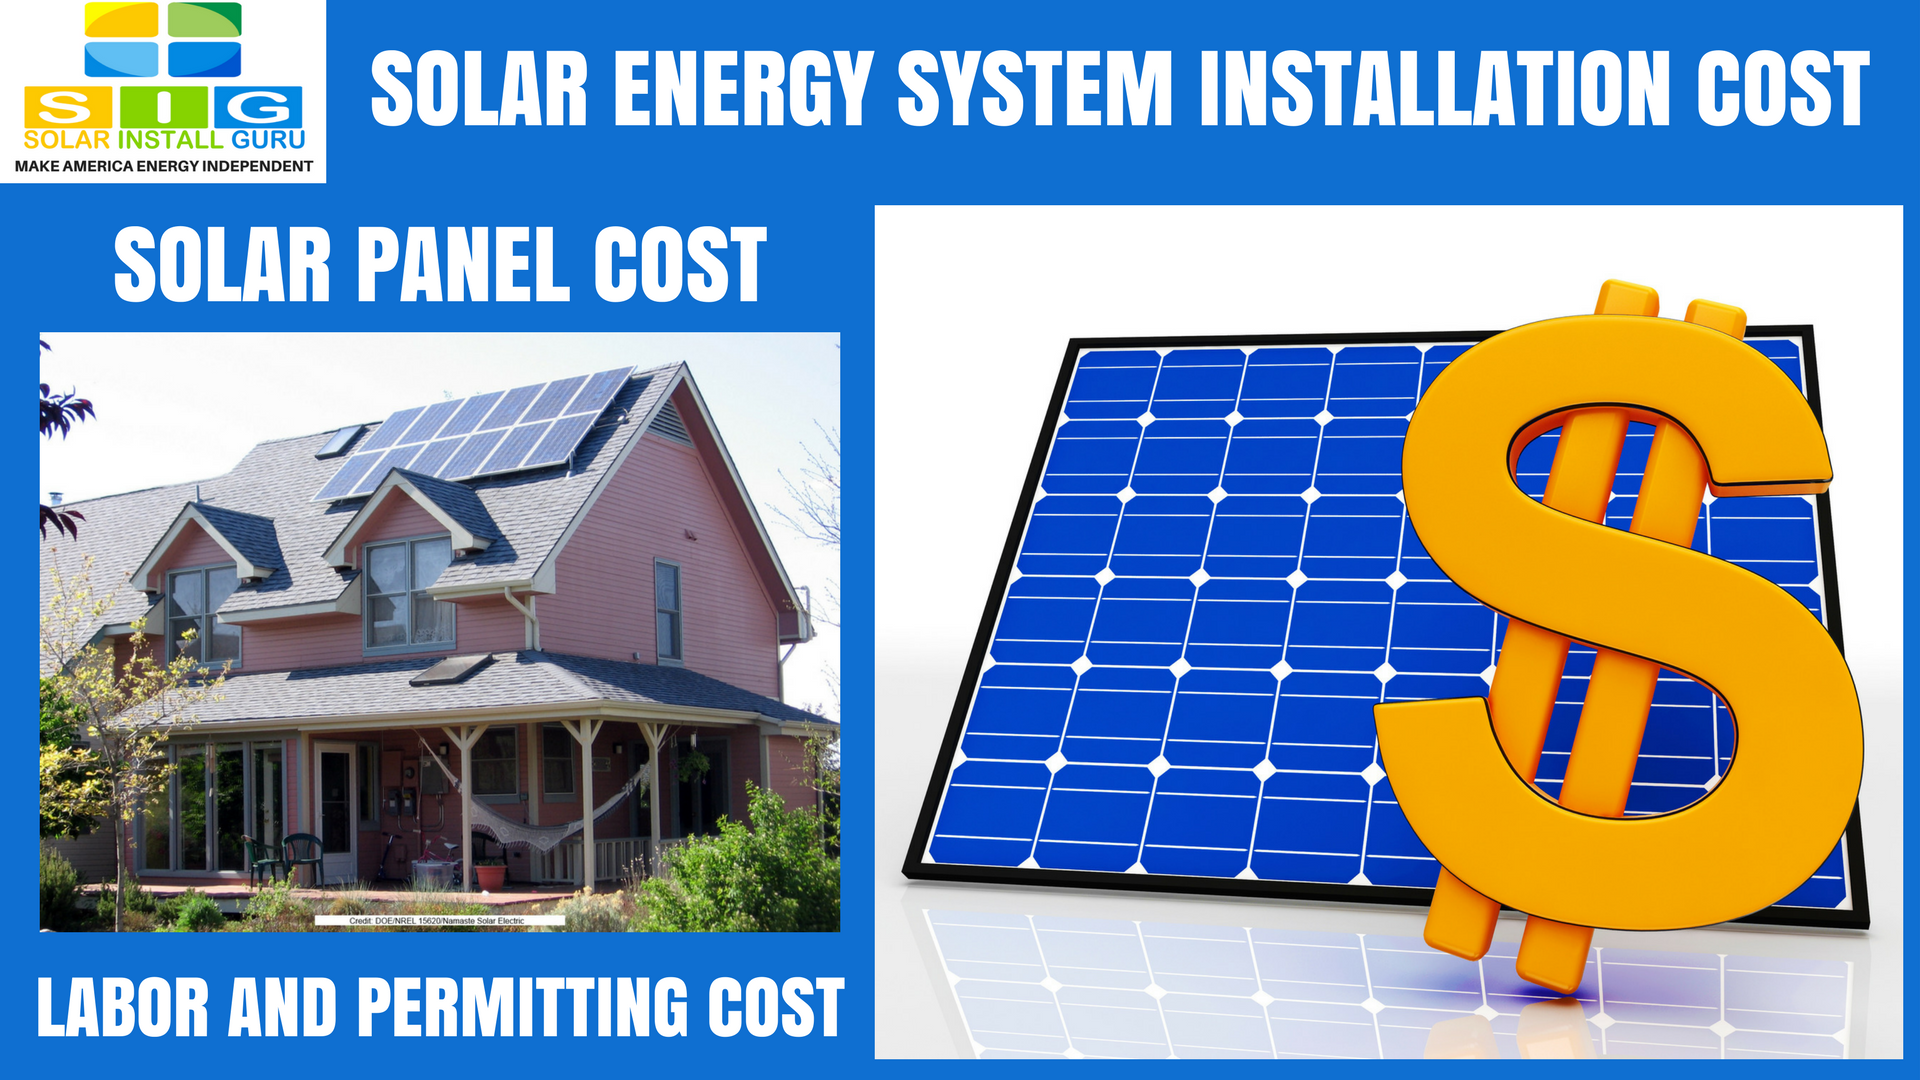 Solar Panel Price: How Much Do The Solar Panels Cost?